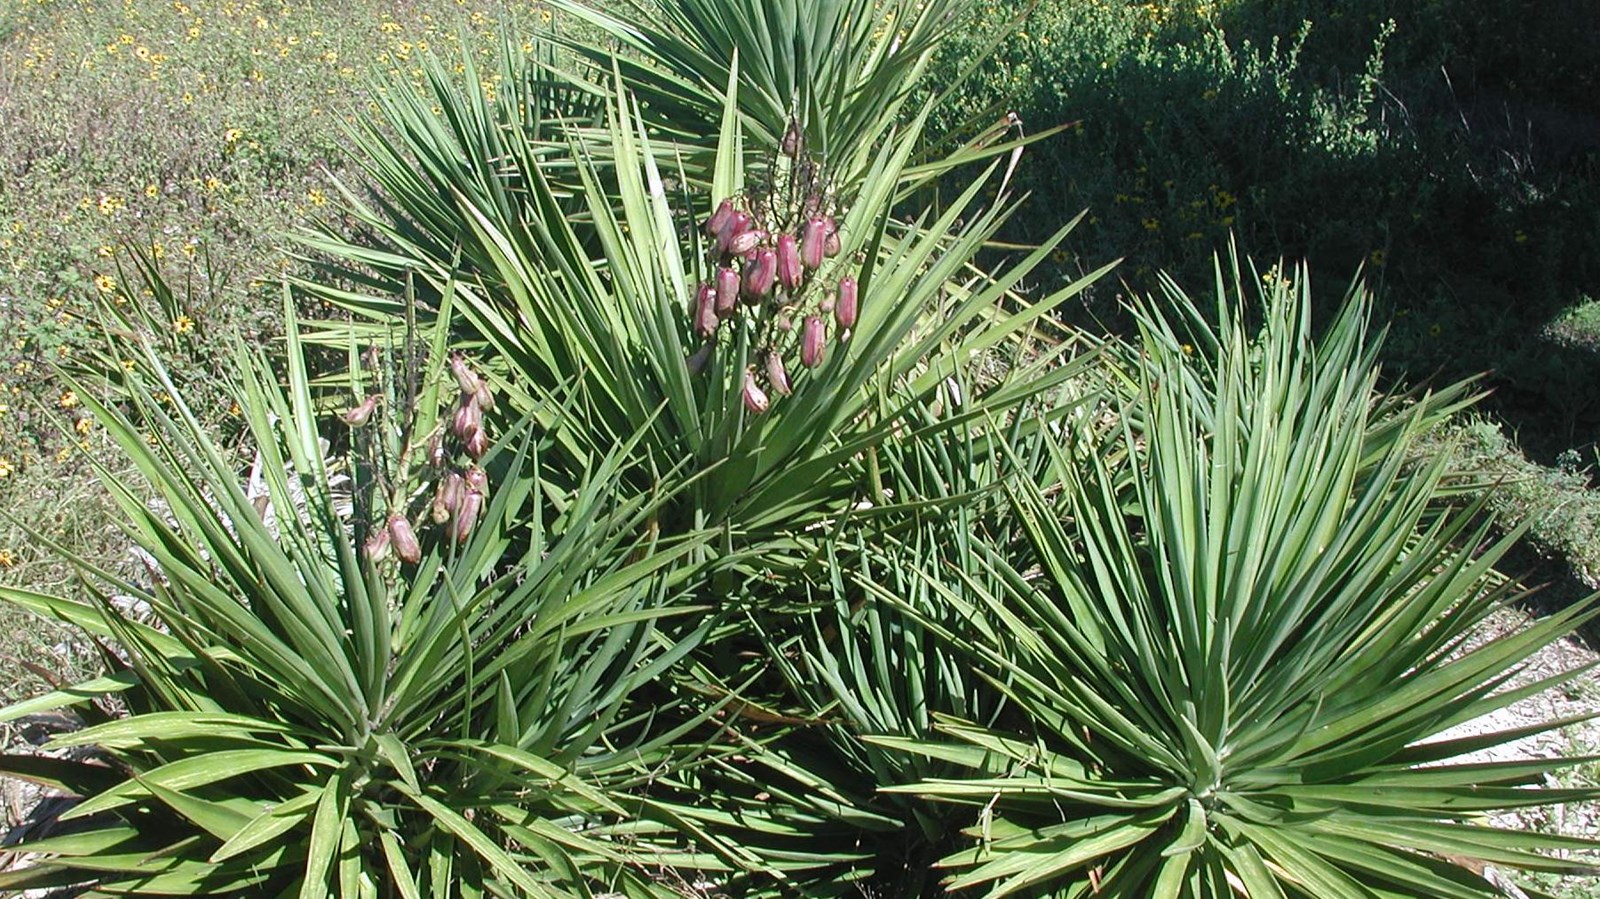 A sharp spiked plant.